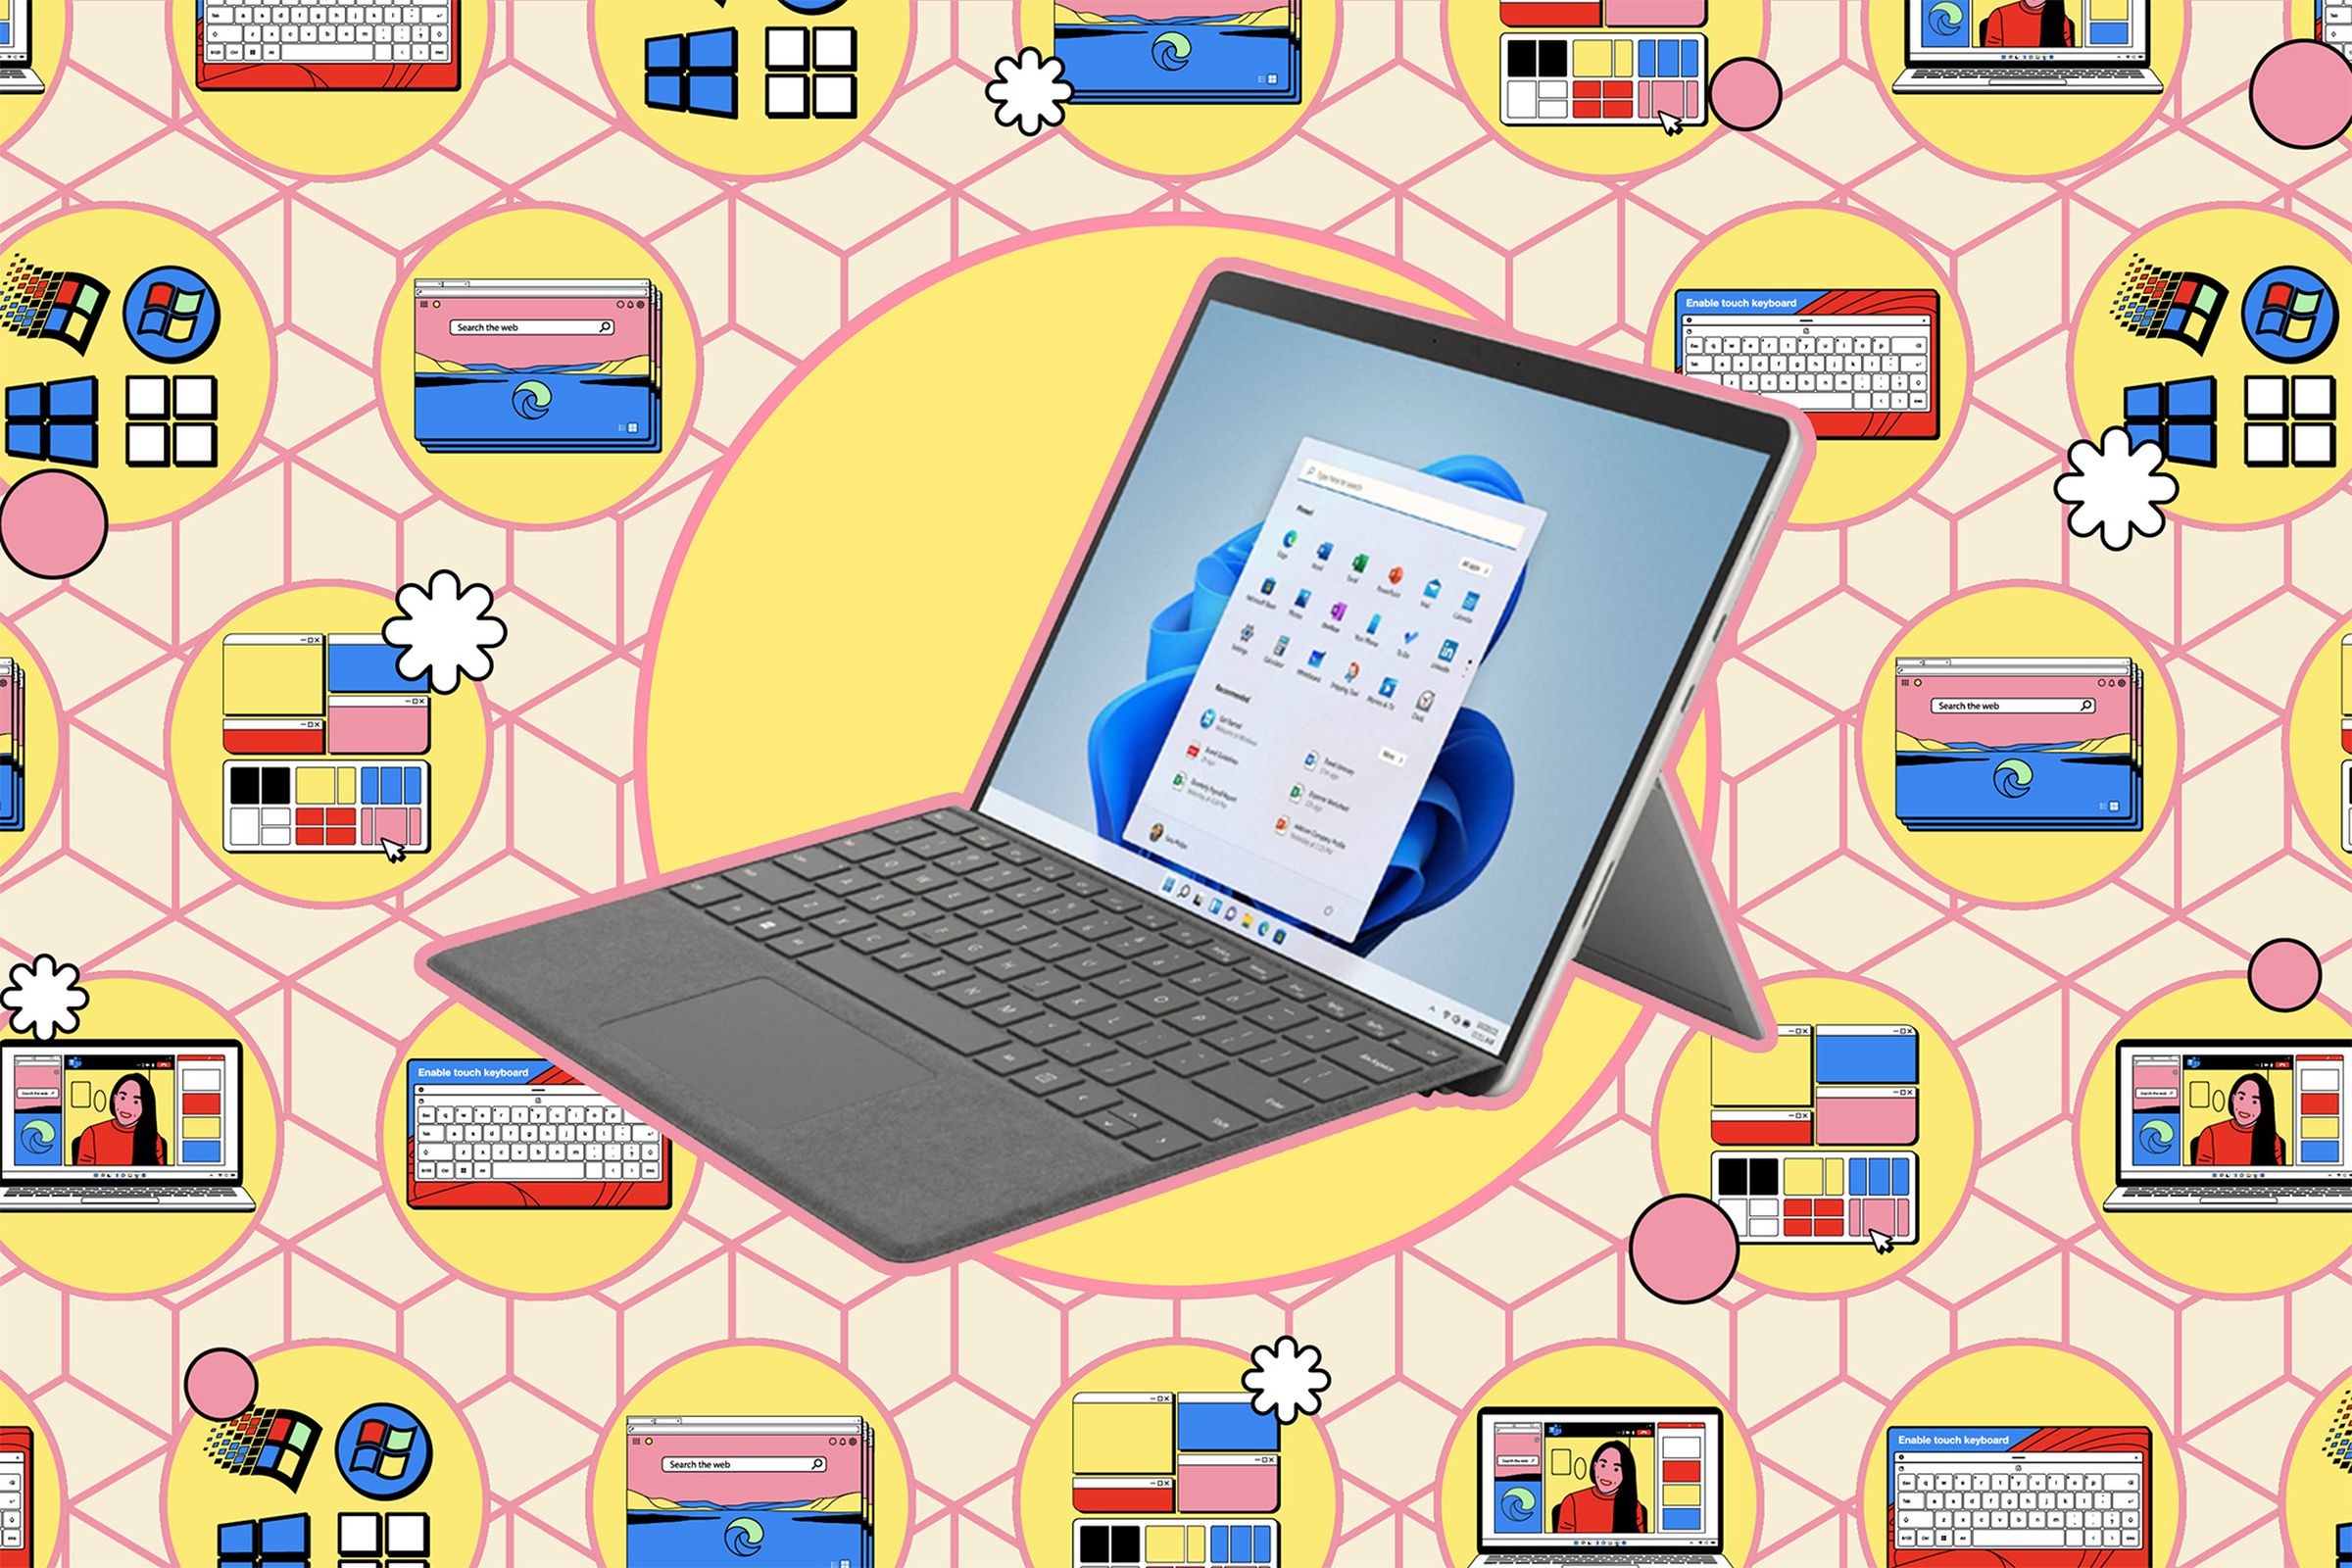 Windows laptop on a yellow background with small illustrations